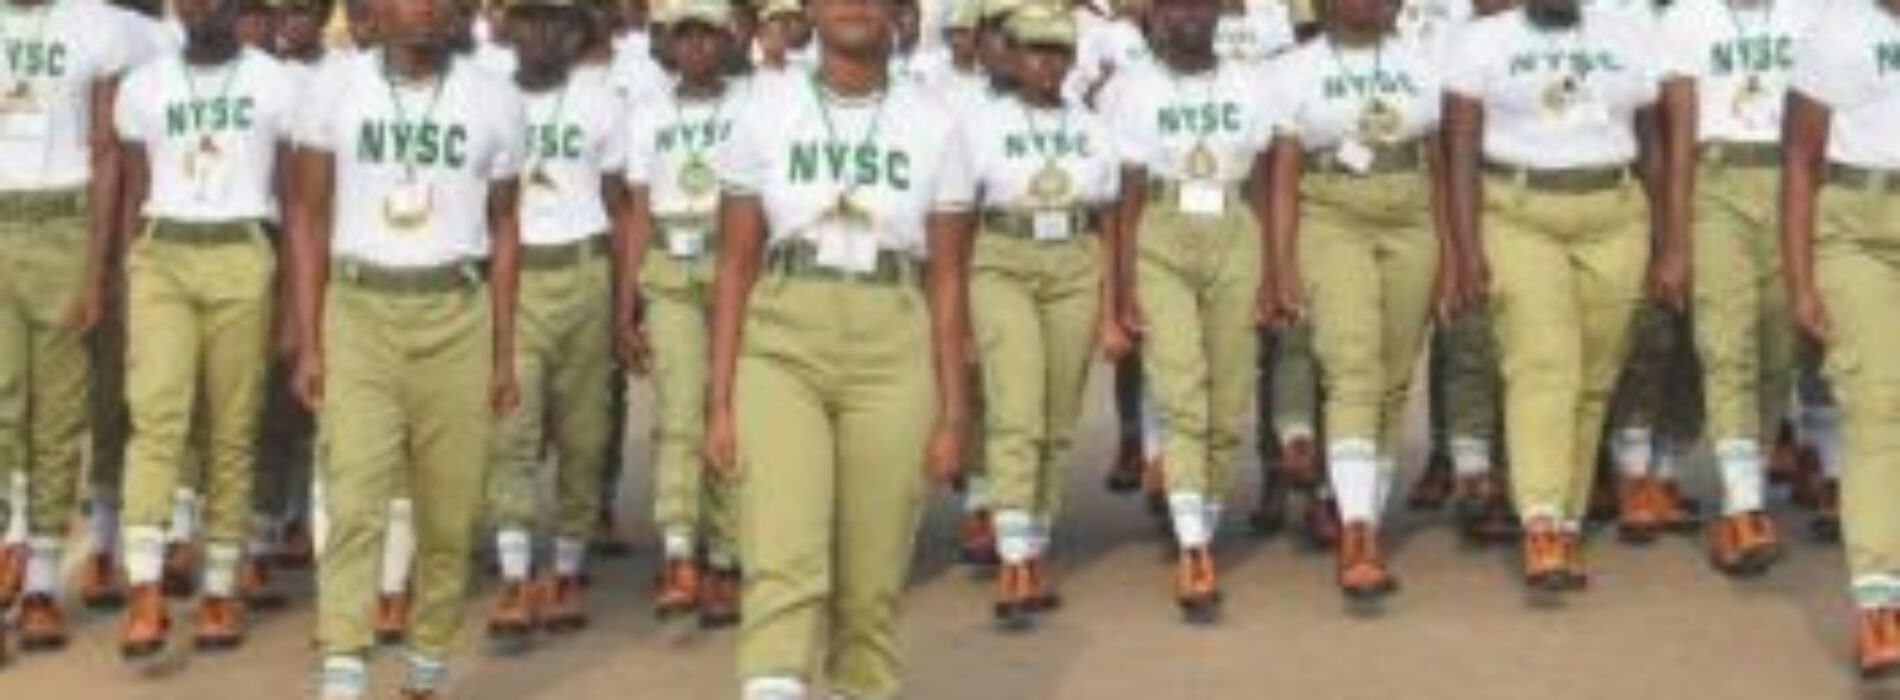 731 NYSC members test positive for COVID-19